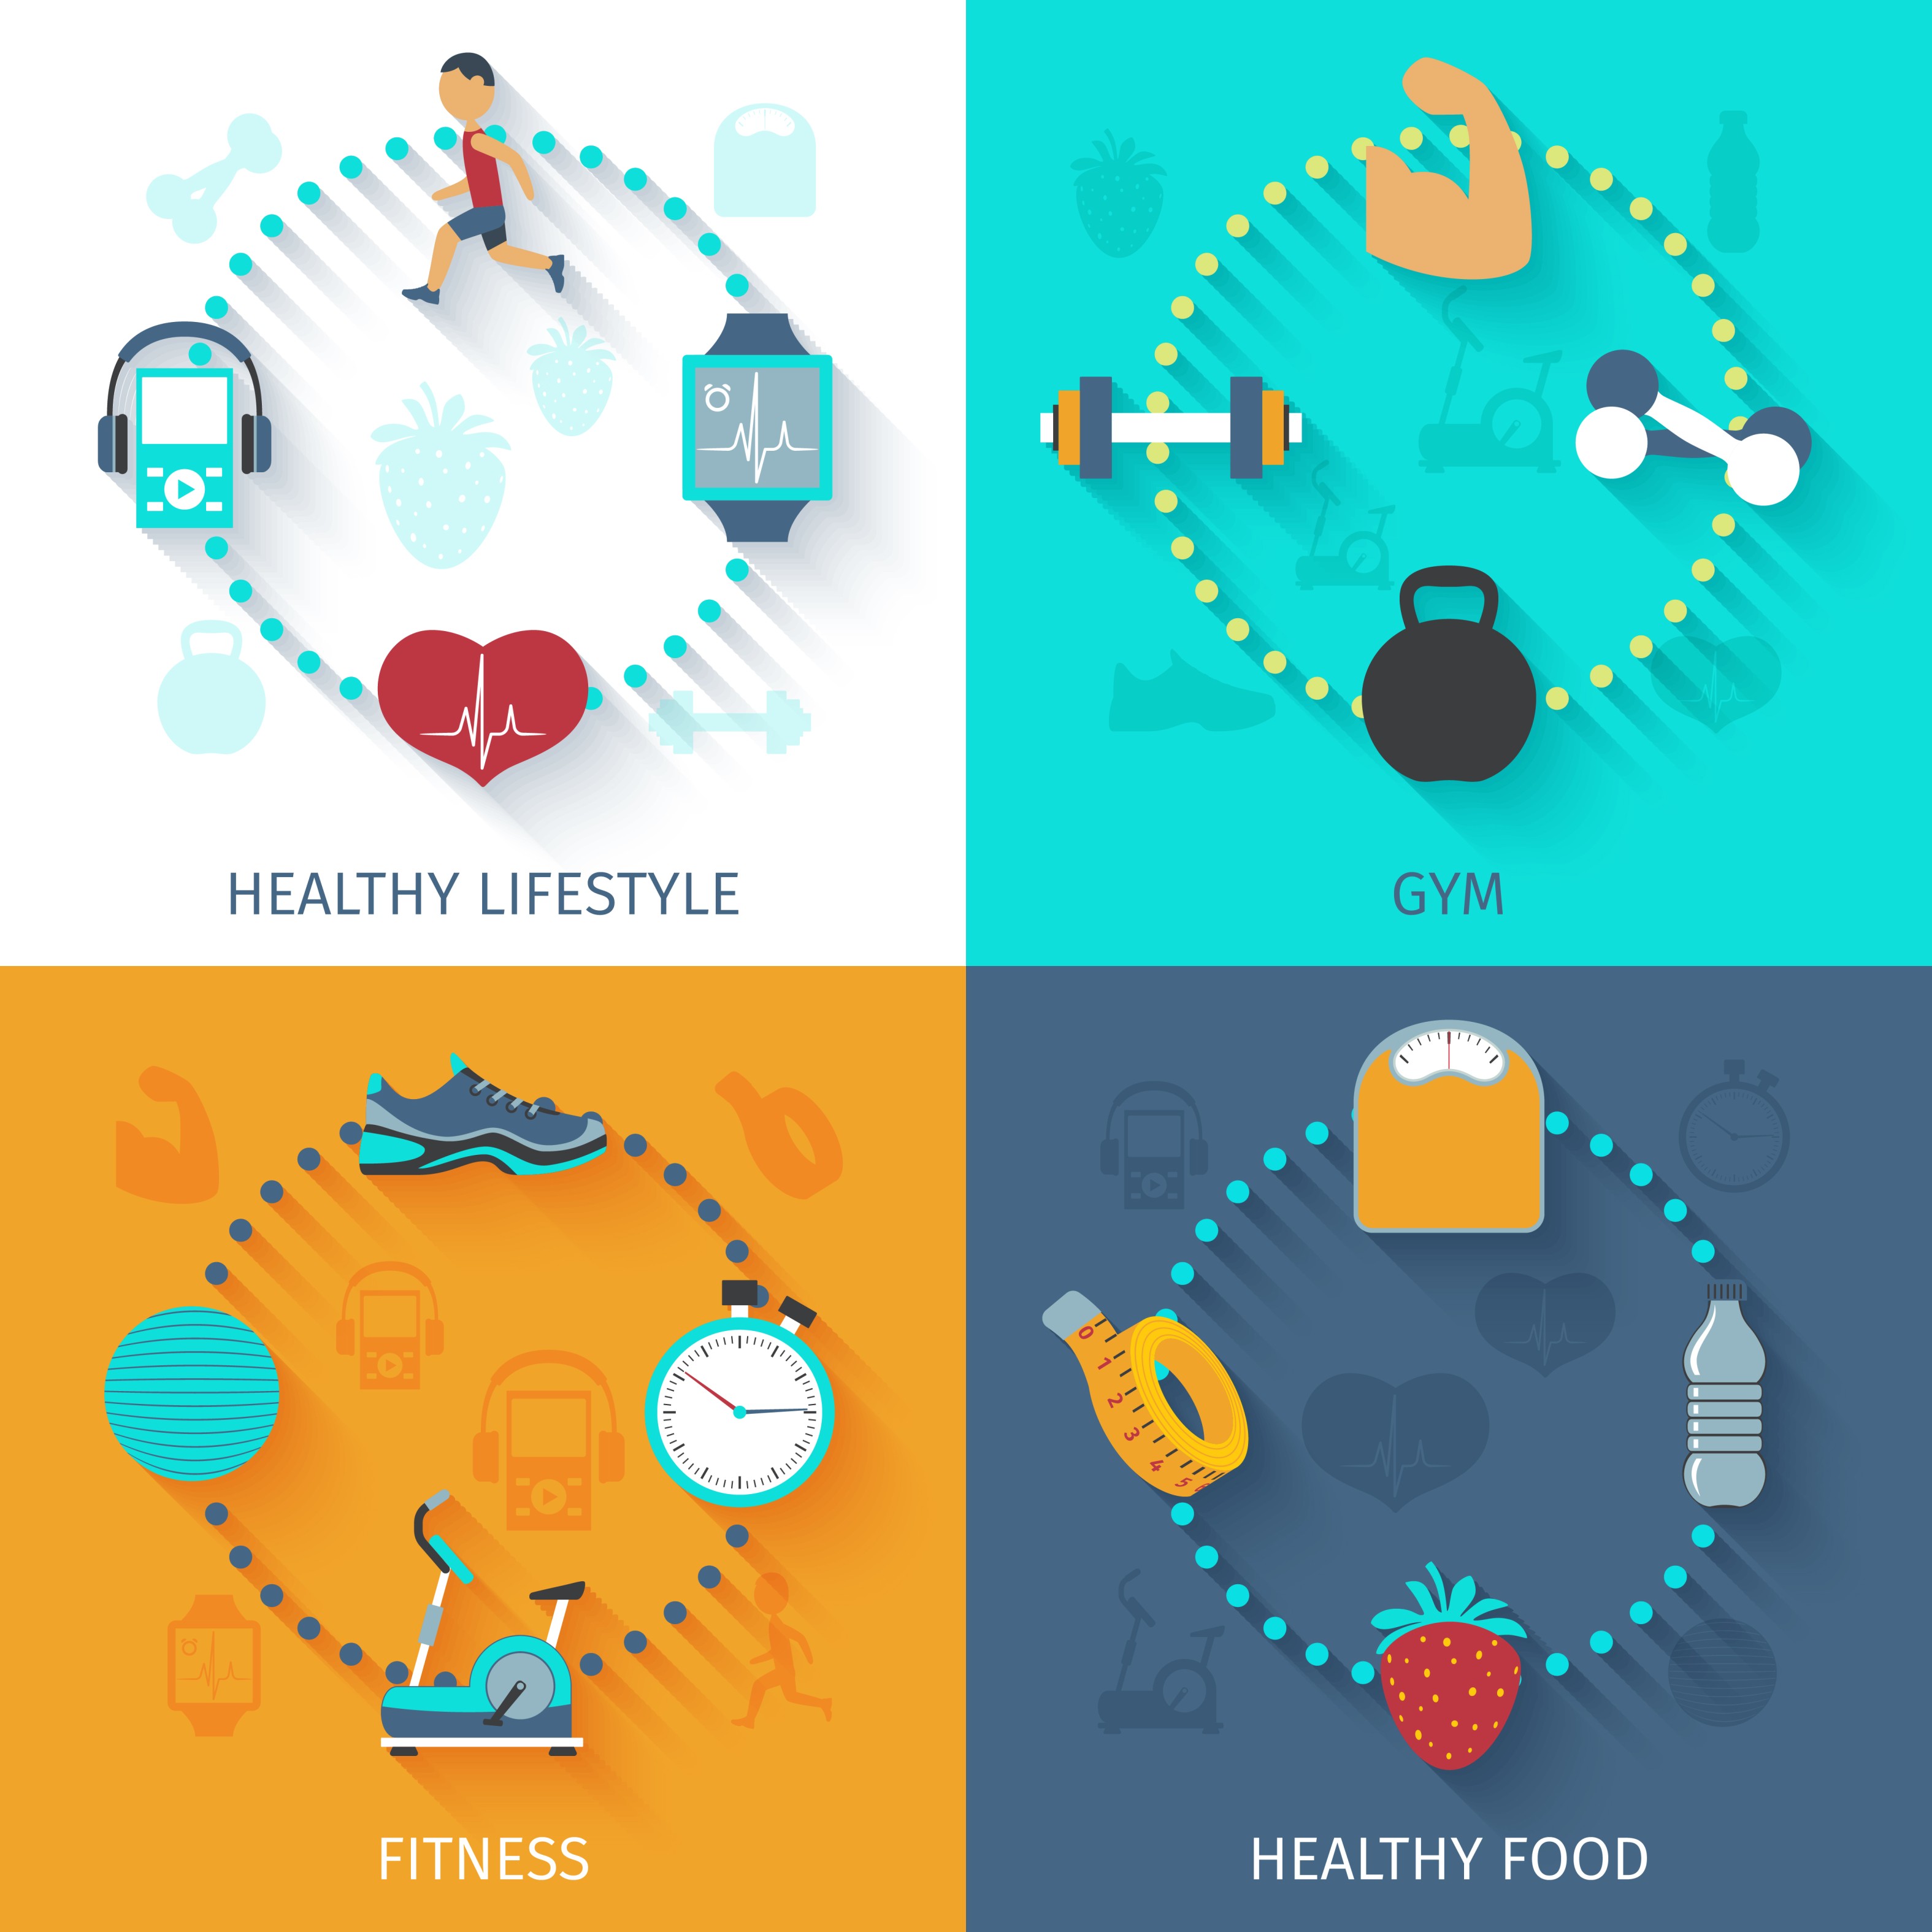 Lifestyle Changes to Manage Congestive Heart Failure